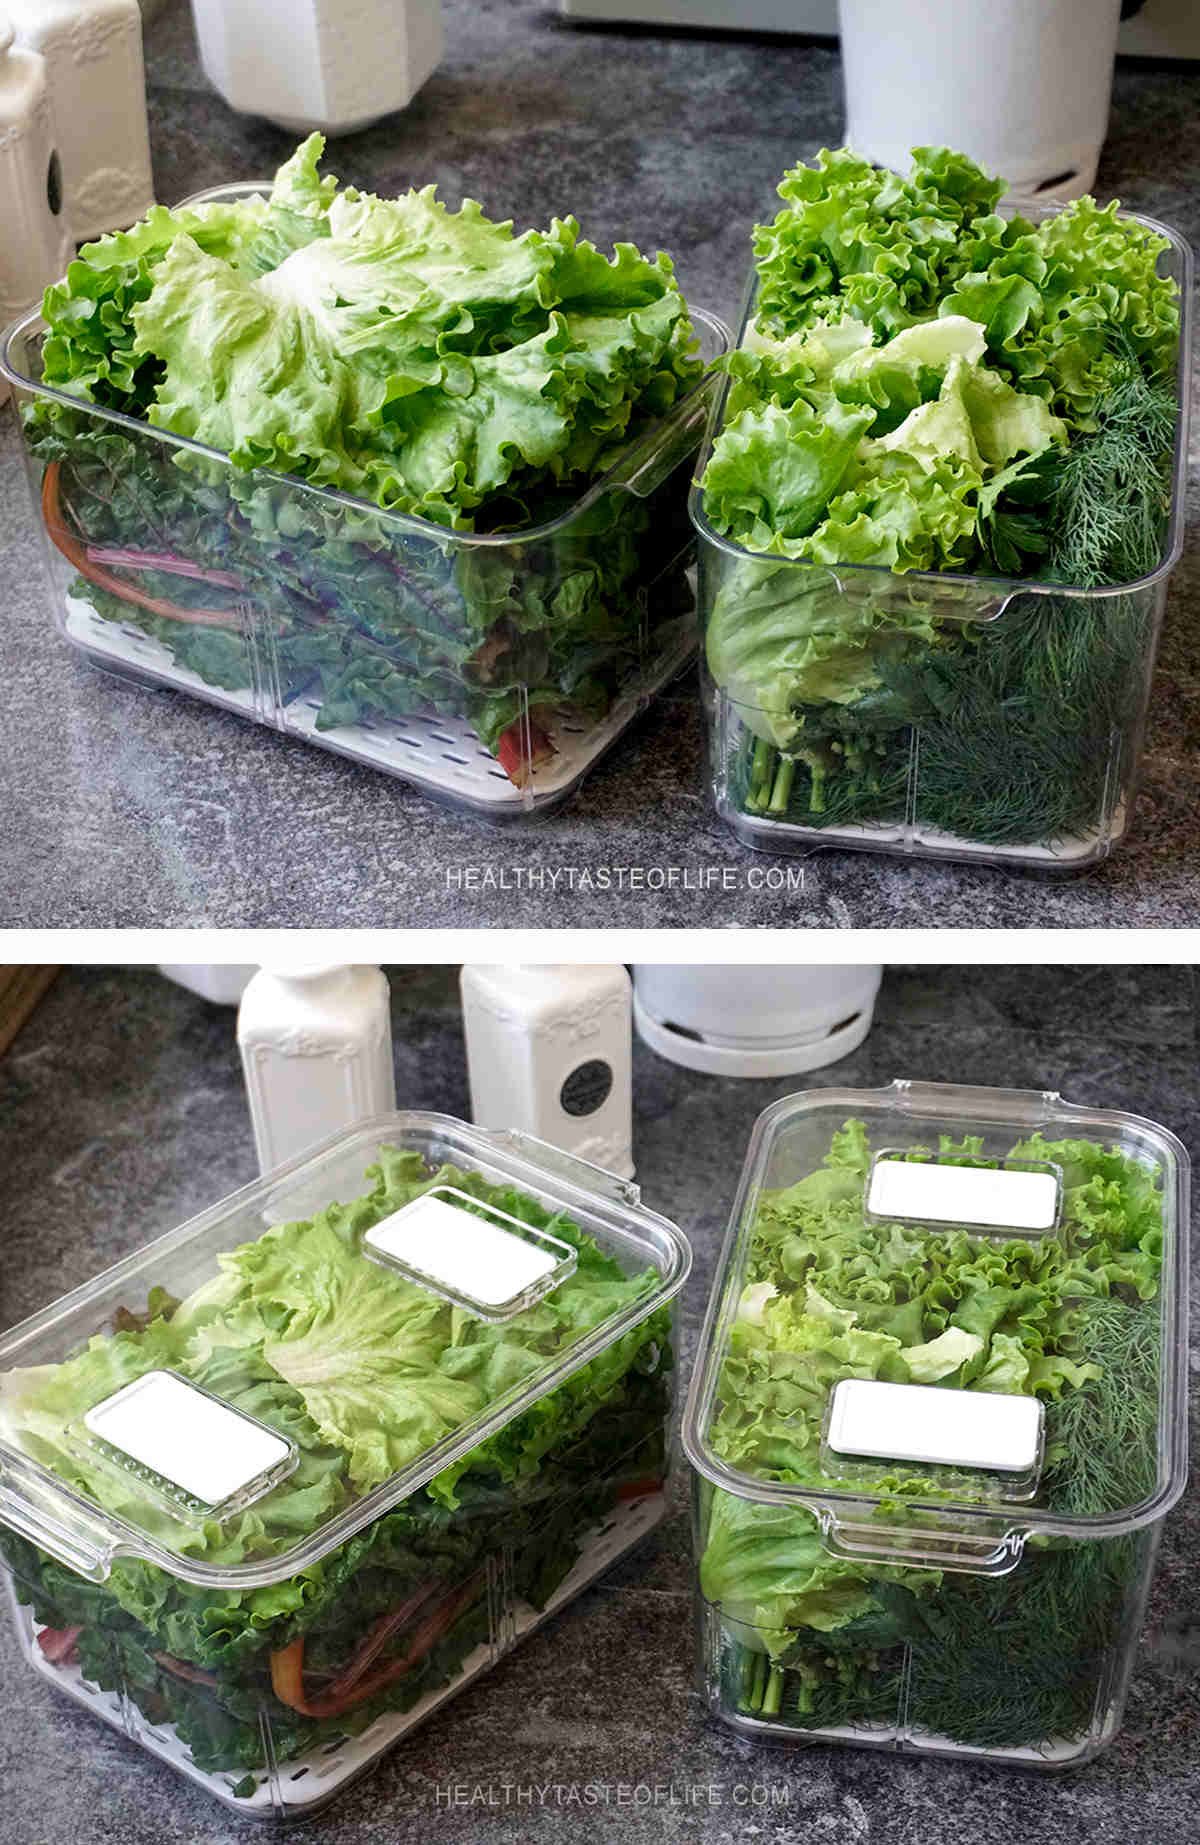 Leafy green vegetables washed with ozonated water (and dried) stored in ventilated containers. These can keep fresh and crisp to up to 12 days in my fridge.